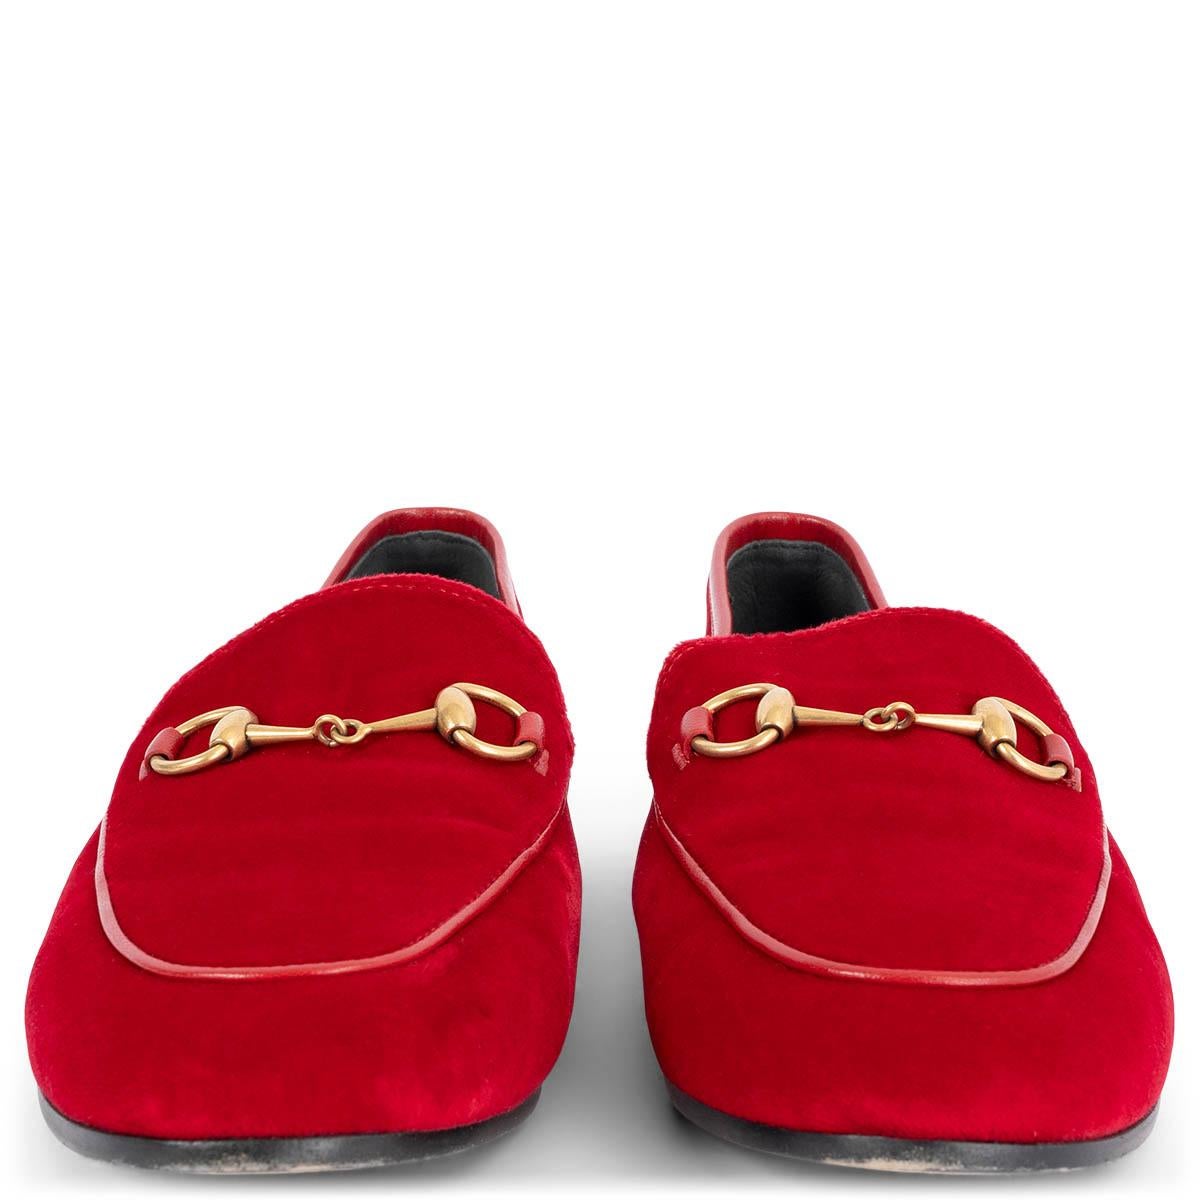 100% authentic Gucci Jordaan Horsebit loafers in red velvet with navy blue leather trim. Have been worn and are in excellent condition. 

Measurements
Imprinted Size	38
Shoe Size	38
Inside Sole	25cm (9.8in)
Width	7.5cm (2.9in)
Heel	1.5cm